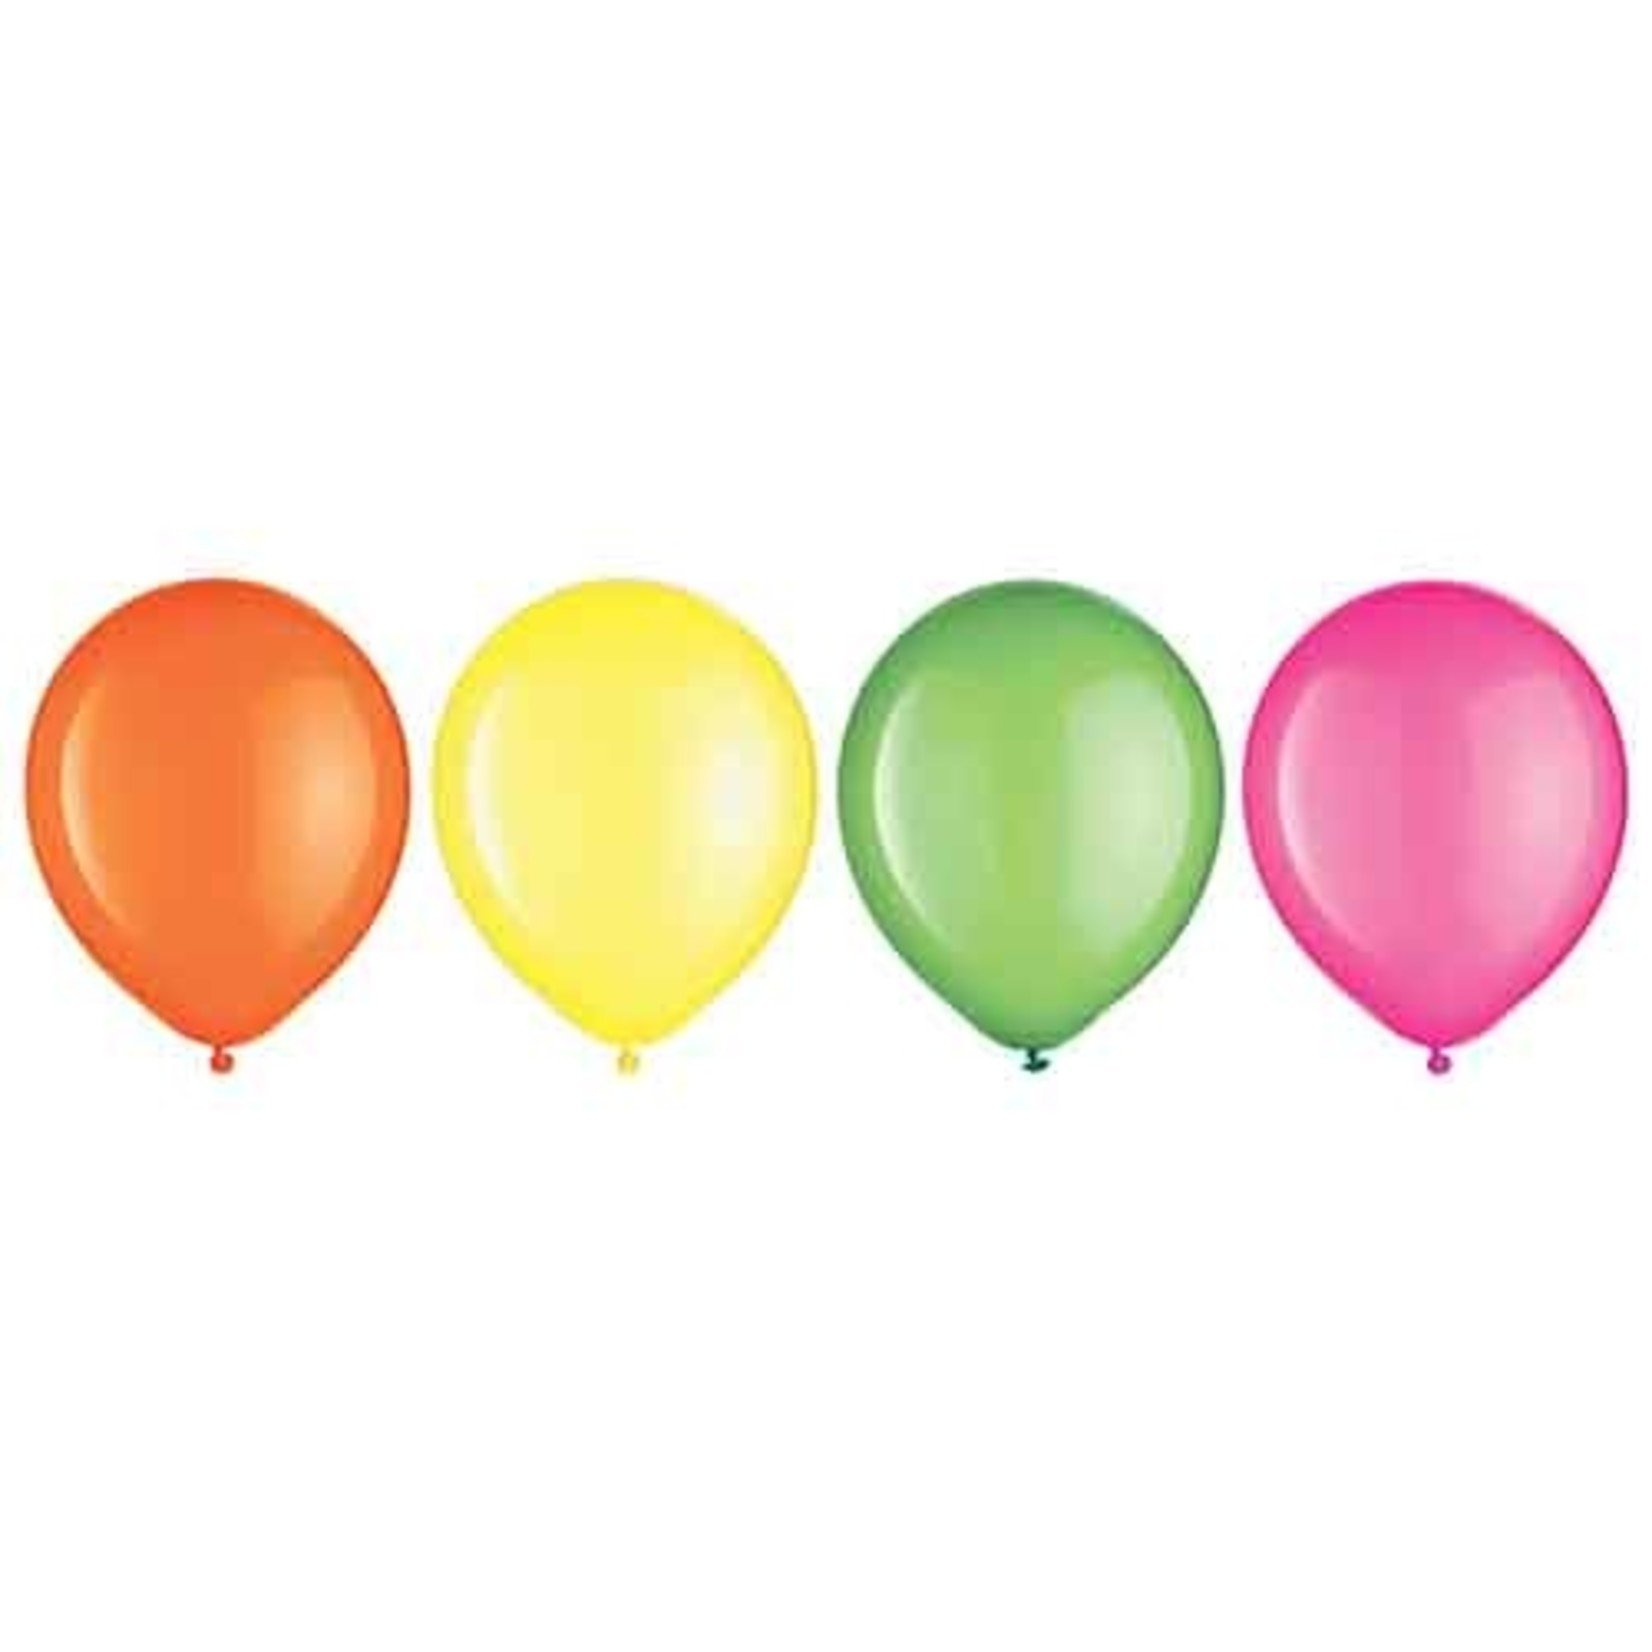 Amscan 11" Neon Latex Balloon Assorted Color Mix - 15ct.